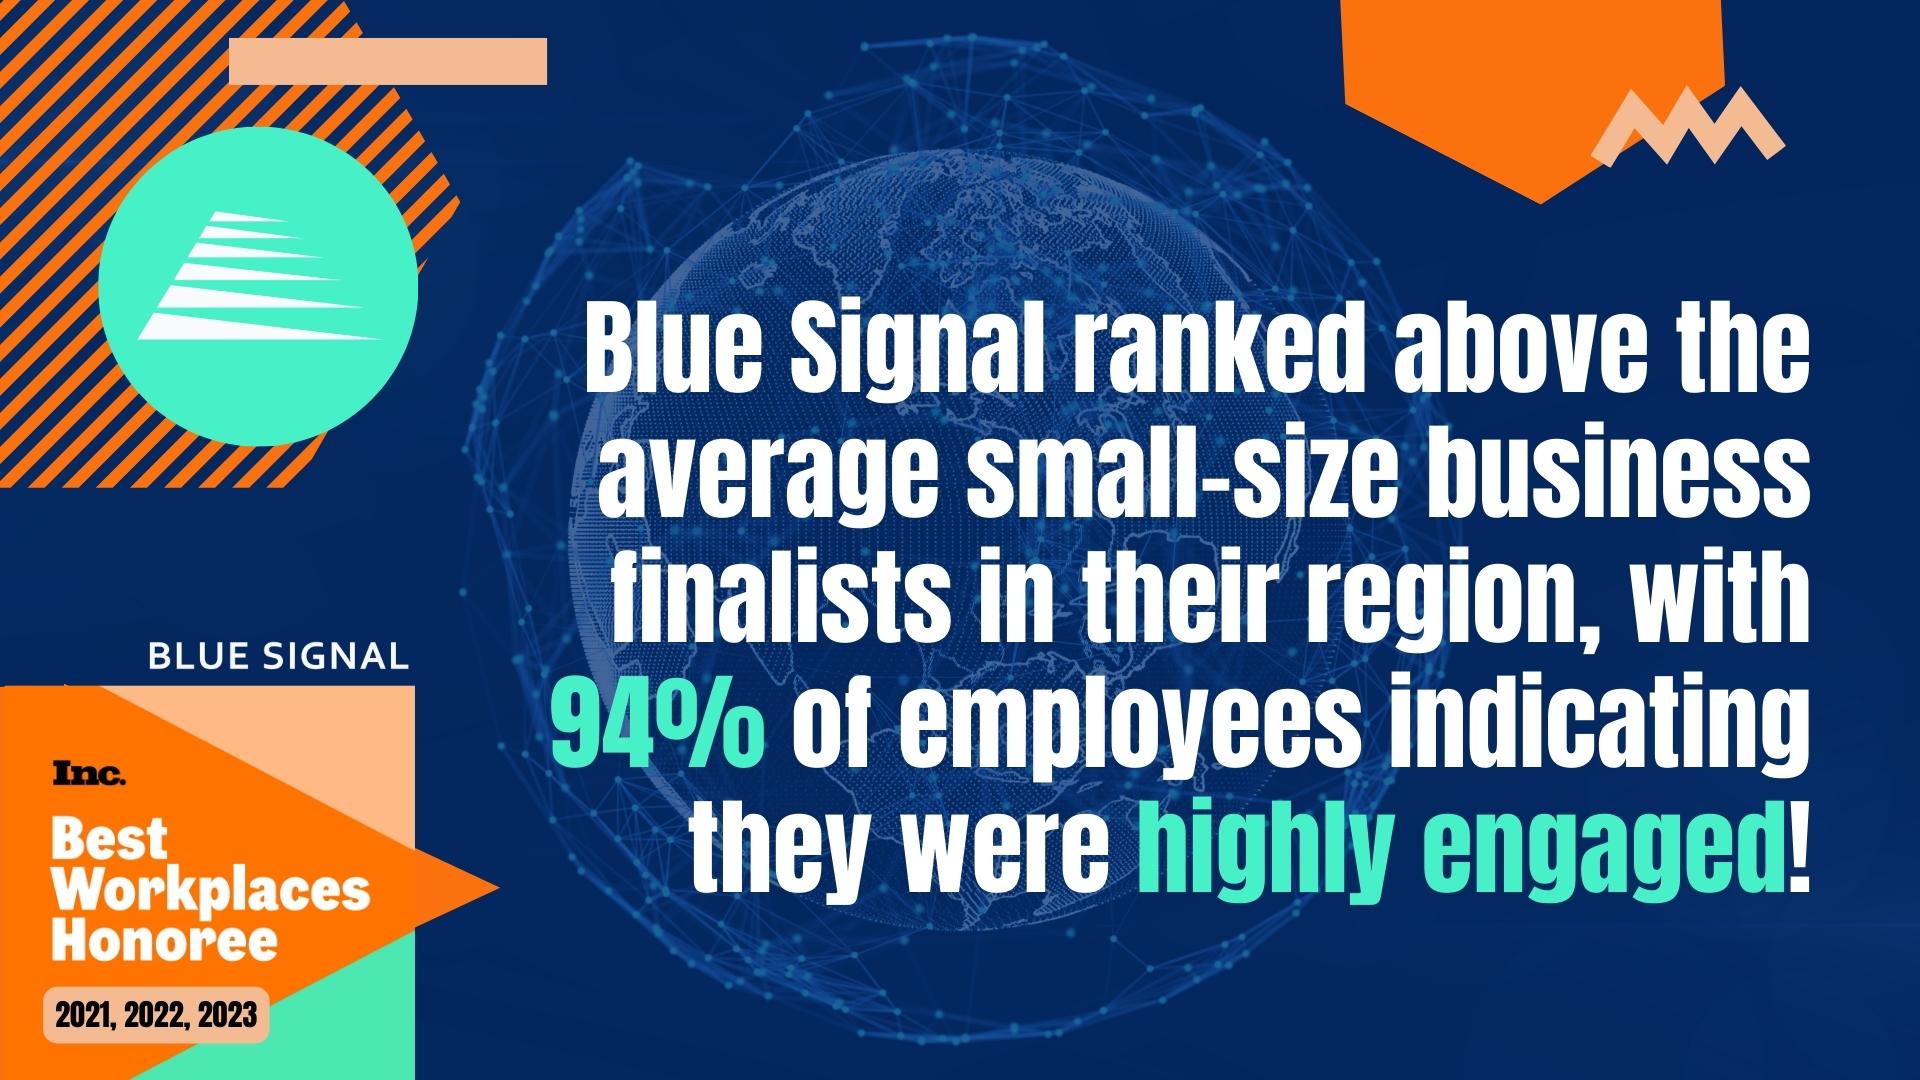 Informational graphic for the results of Blue Signal's Inc. Best Workplaces 2023 list findings.